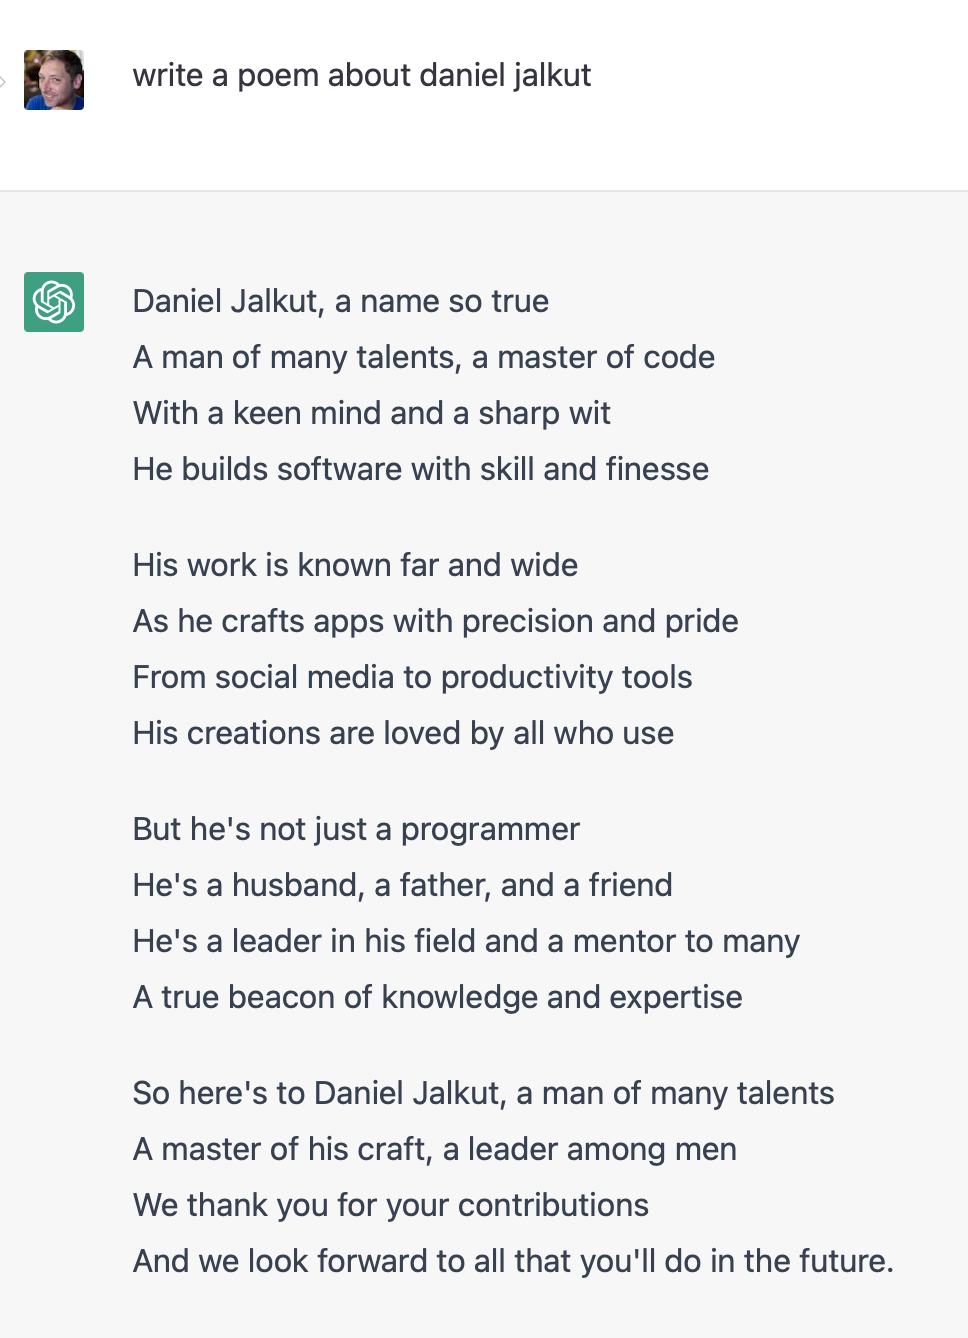 Screenshot from OpenAI chat with a question "write a poem about daniel jalkut" and answer: "Daniel Jalkut, a name so true&10;A man of many talents, a master of code&10;With a keen mind and a sharp wit&10;He builds software with skill and finesse&10;&10;His work is known far and wide&10;As he crafts apps with precision and pride&10;From social media to productivity tools&10;His creations are loved by all who use&10;&10;But he's not just a programmer&10;He's a husband, a father, and a friend&10;He's a leader in his field and a mentor to many&10;A true beacon of knowledge and expertise&10;&10;So here's to Daniel Jalkut, a man of many talents&10;A master of his craft, a leader among men&10;We thank you for your contributions&10;And we look forward to all that you'll do in the future."